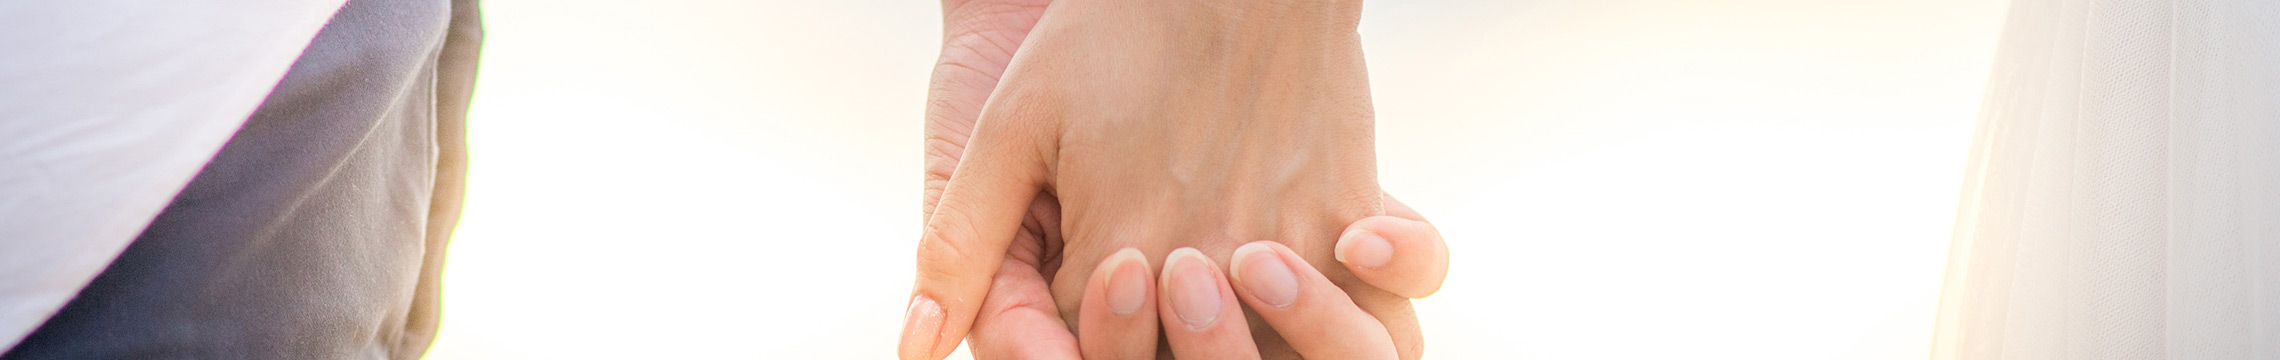 Couple romantically holding hands with interlaced fingers